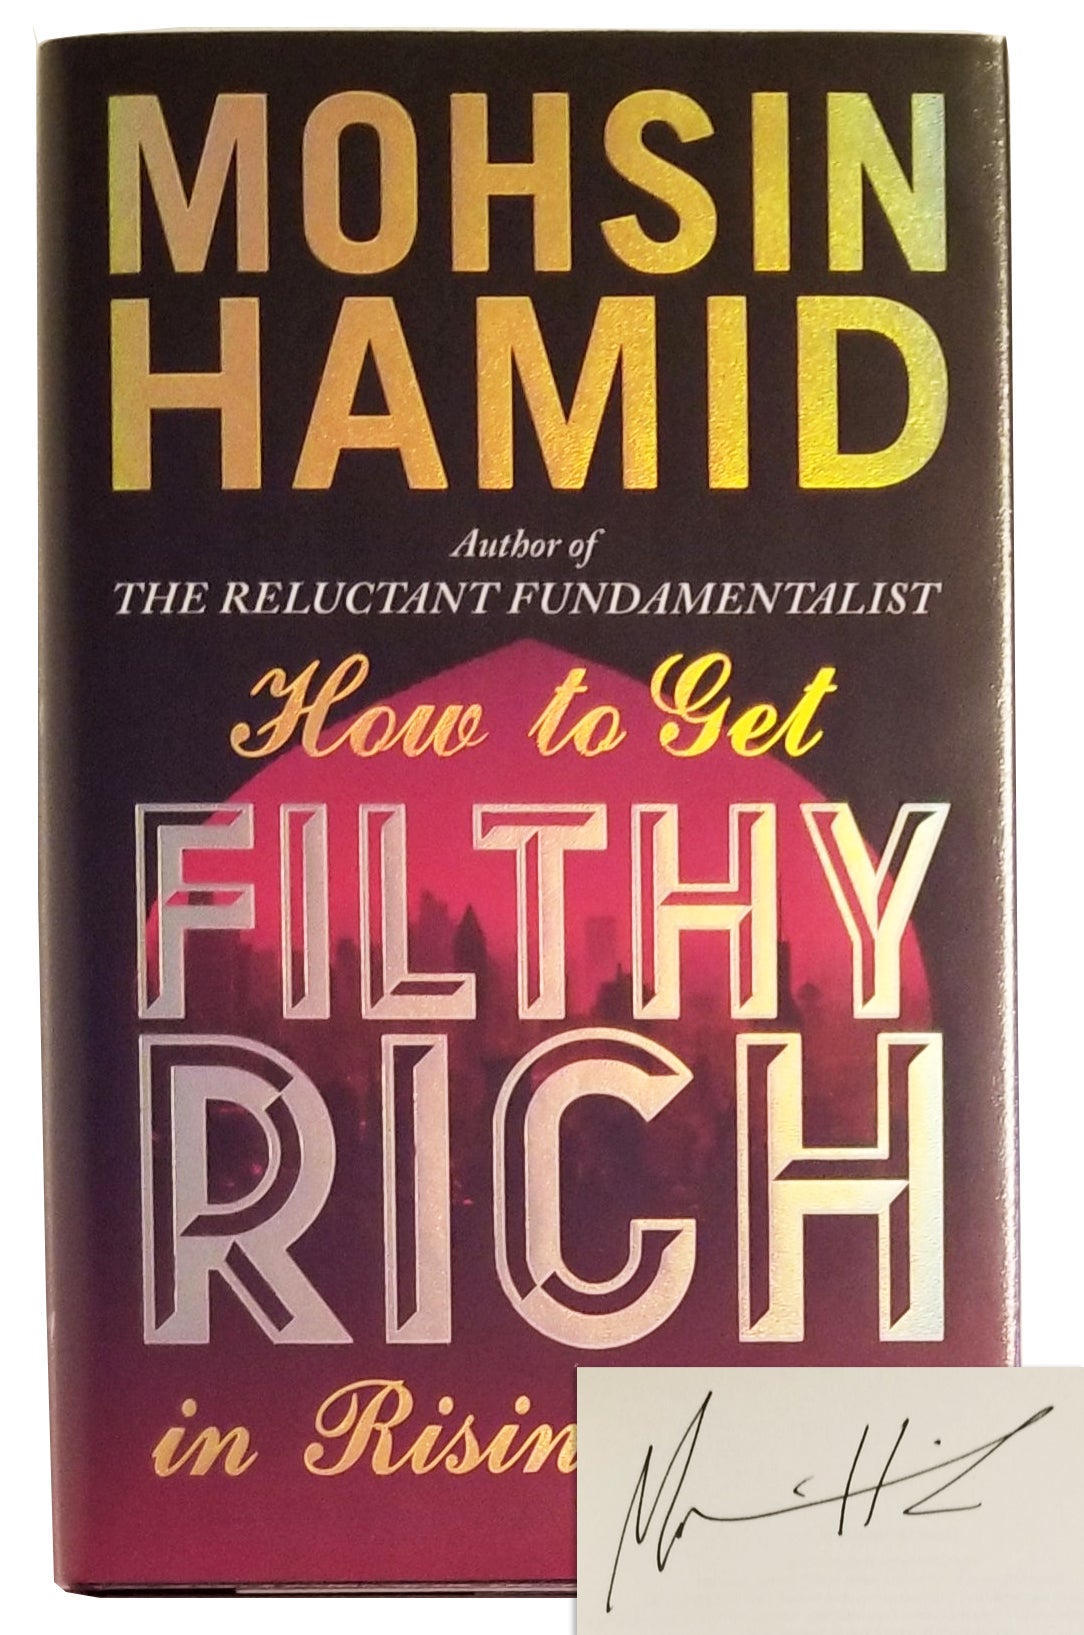 [Book #26493] HOW TO GET FILTHY RICH IN RISING ASIA. Mohsin Hamid.